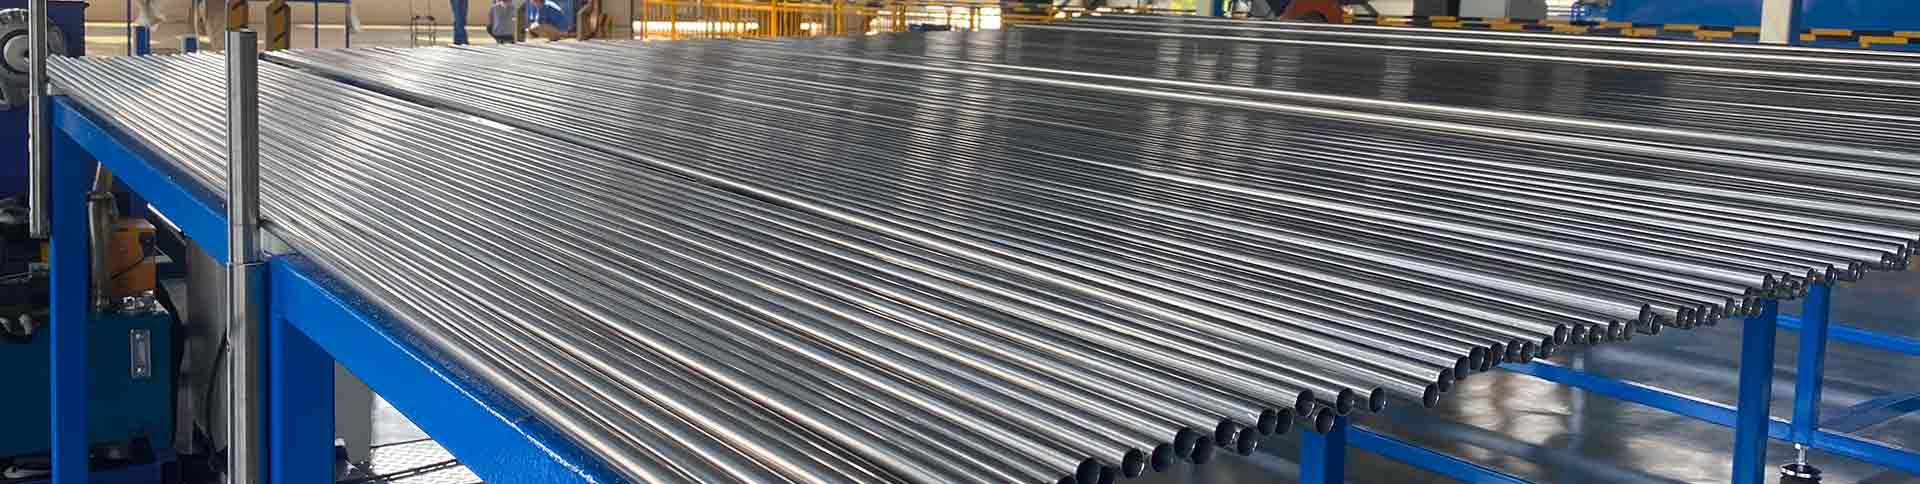 Analysis of Main Factors Affecting the Welding Quality of Titanium Alloy Pipes